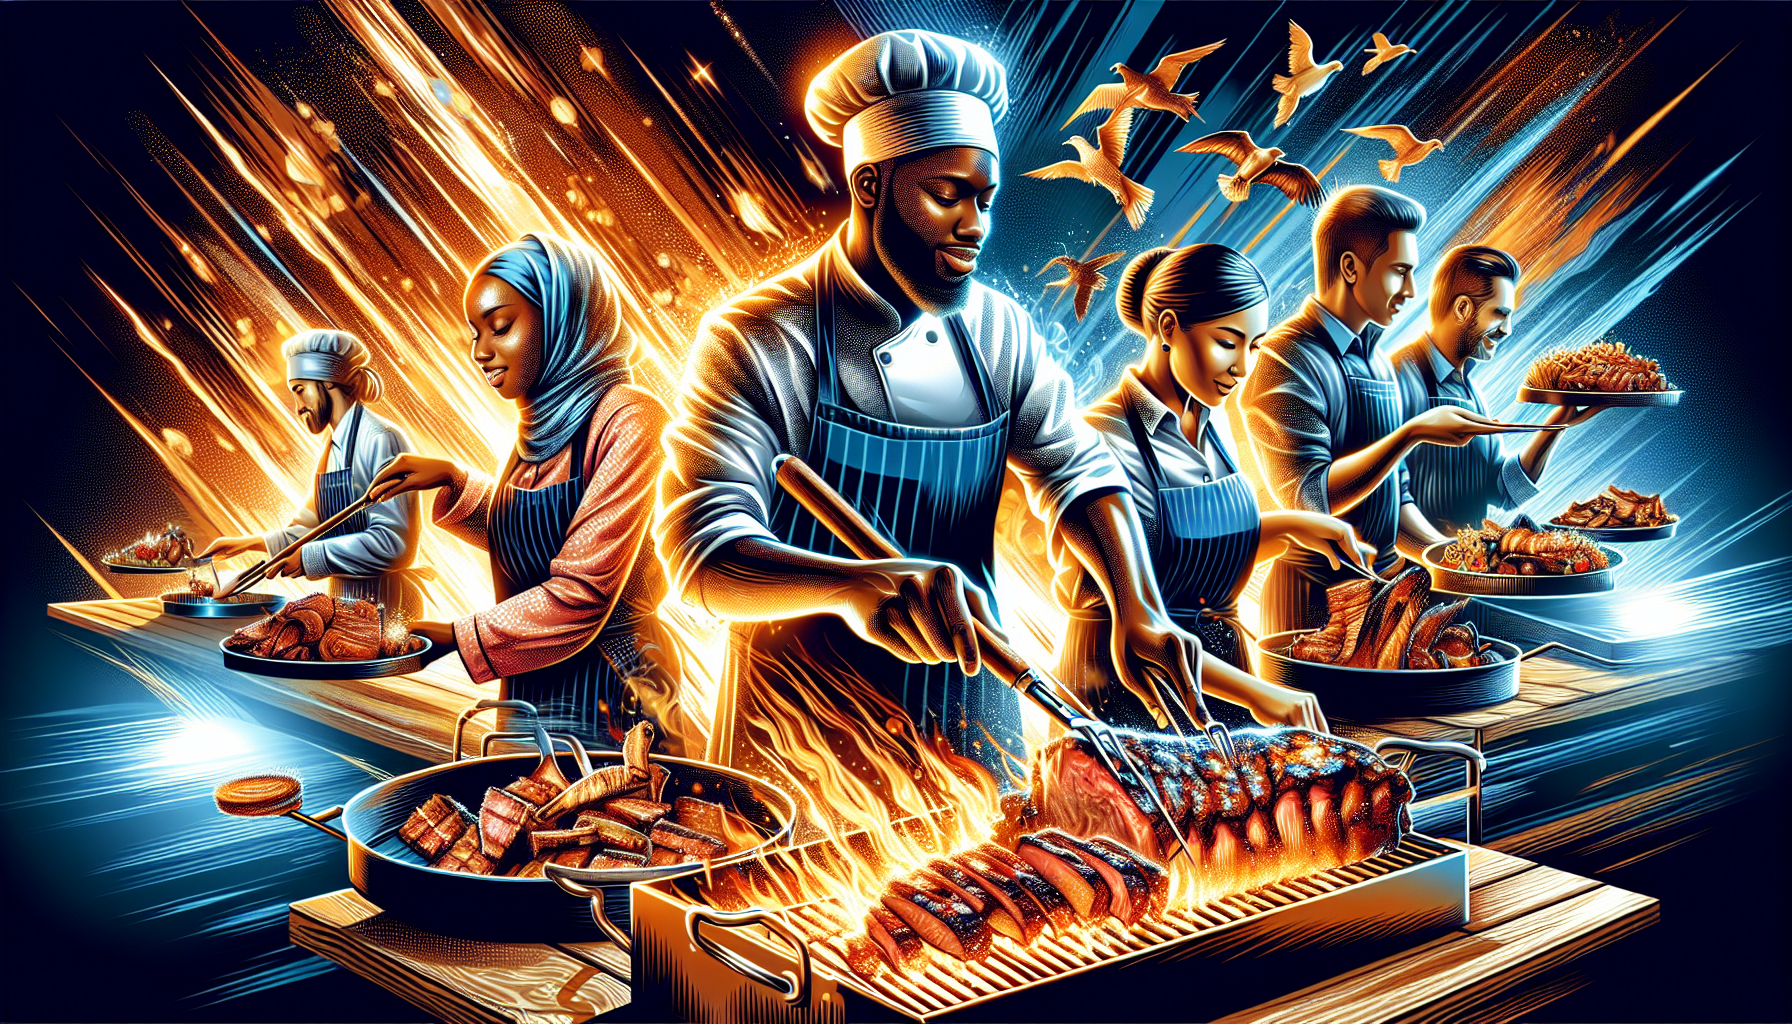 Artistic illustration of BBQ catering specialists preparing food for an event